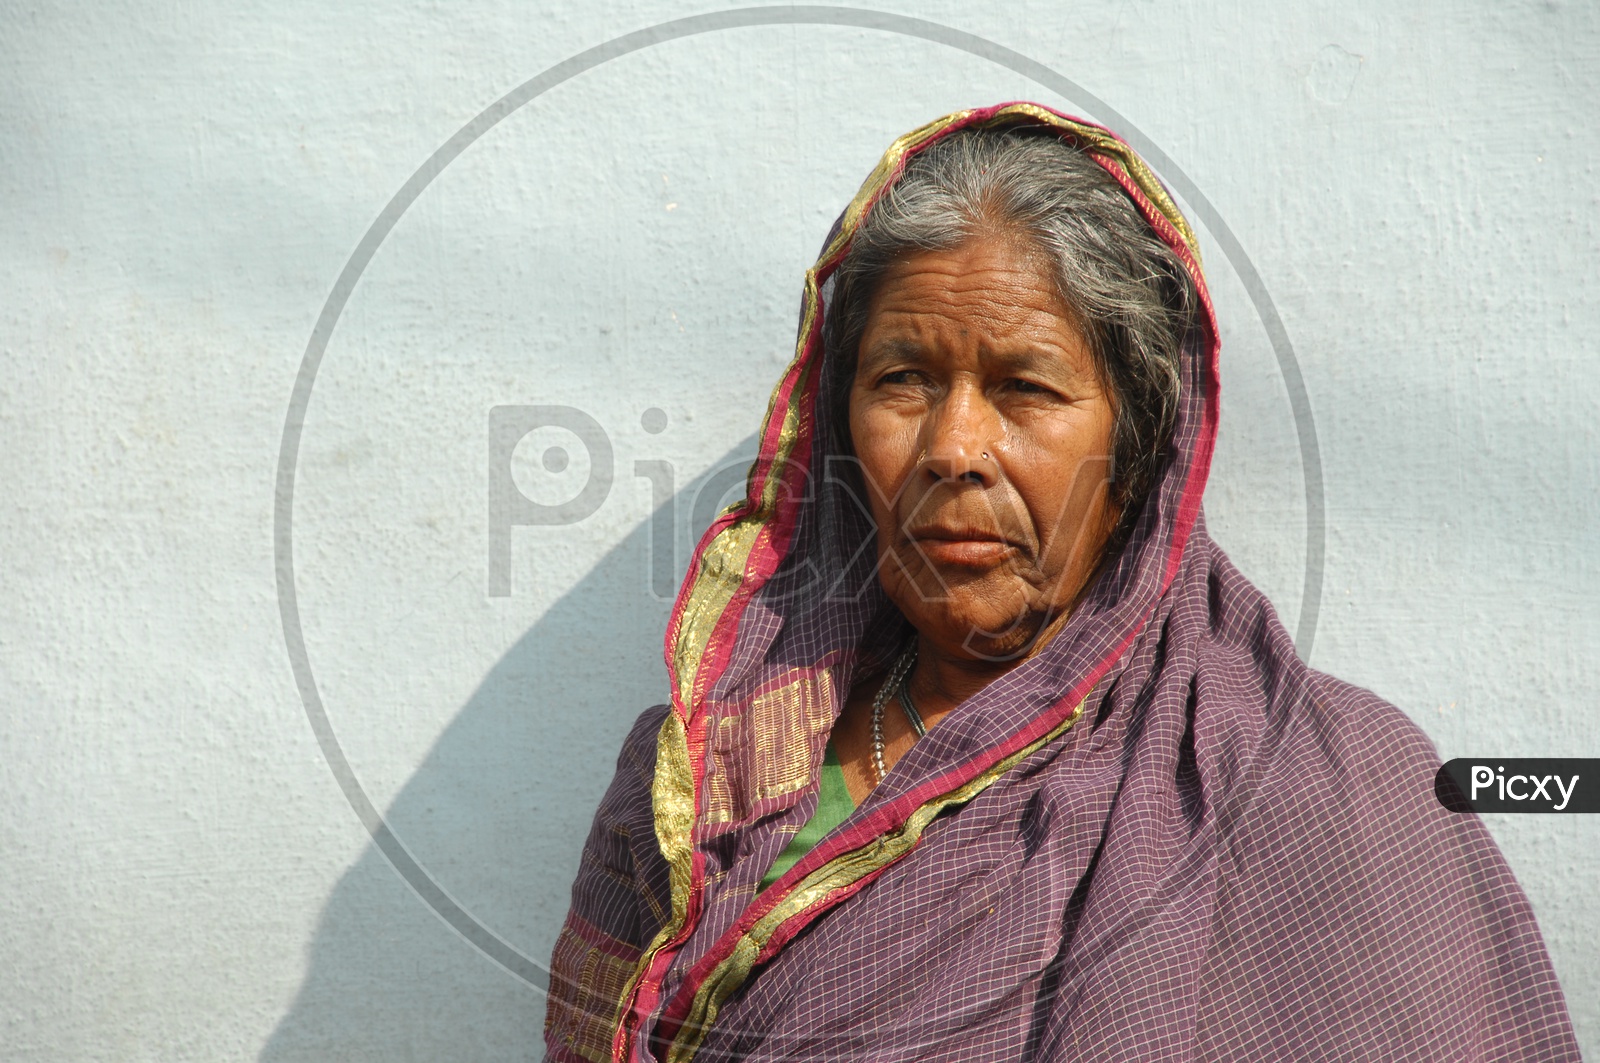 Photograph of an Old women / People faces